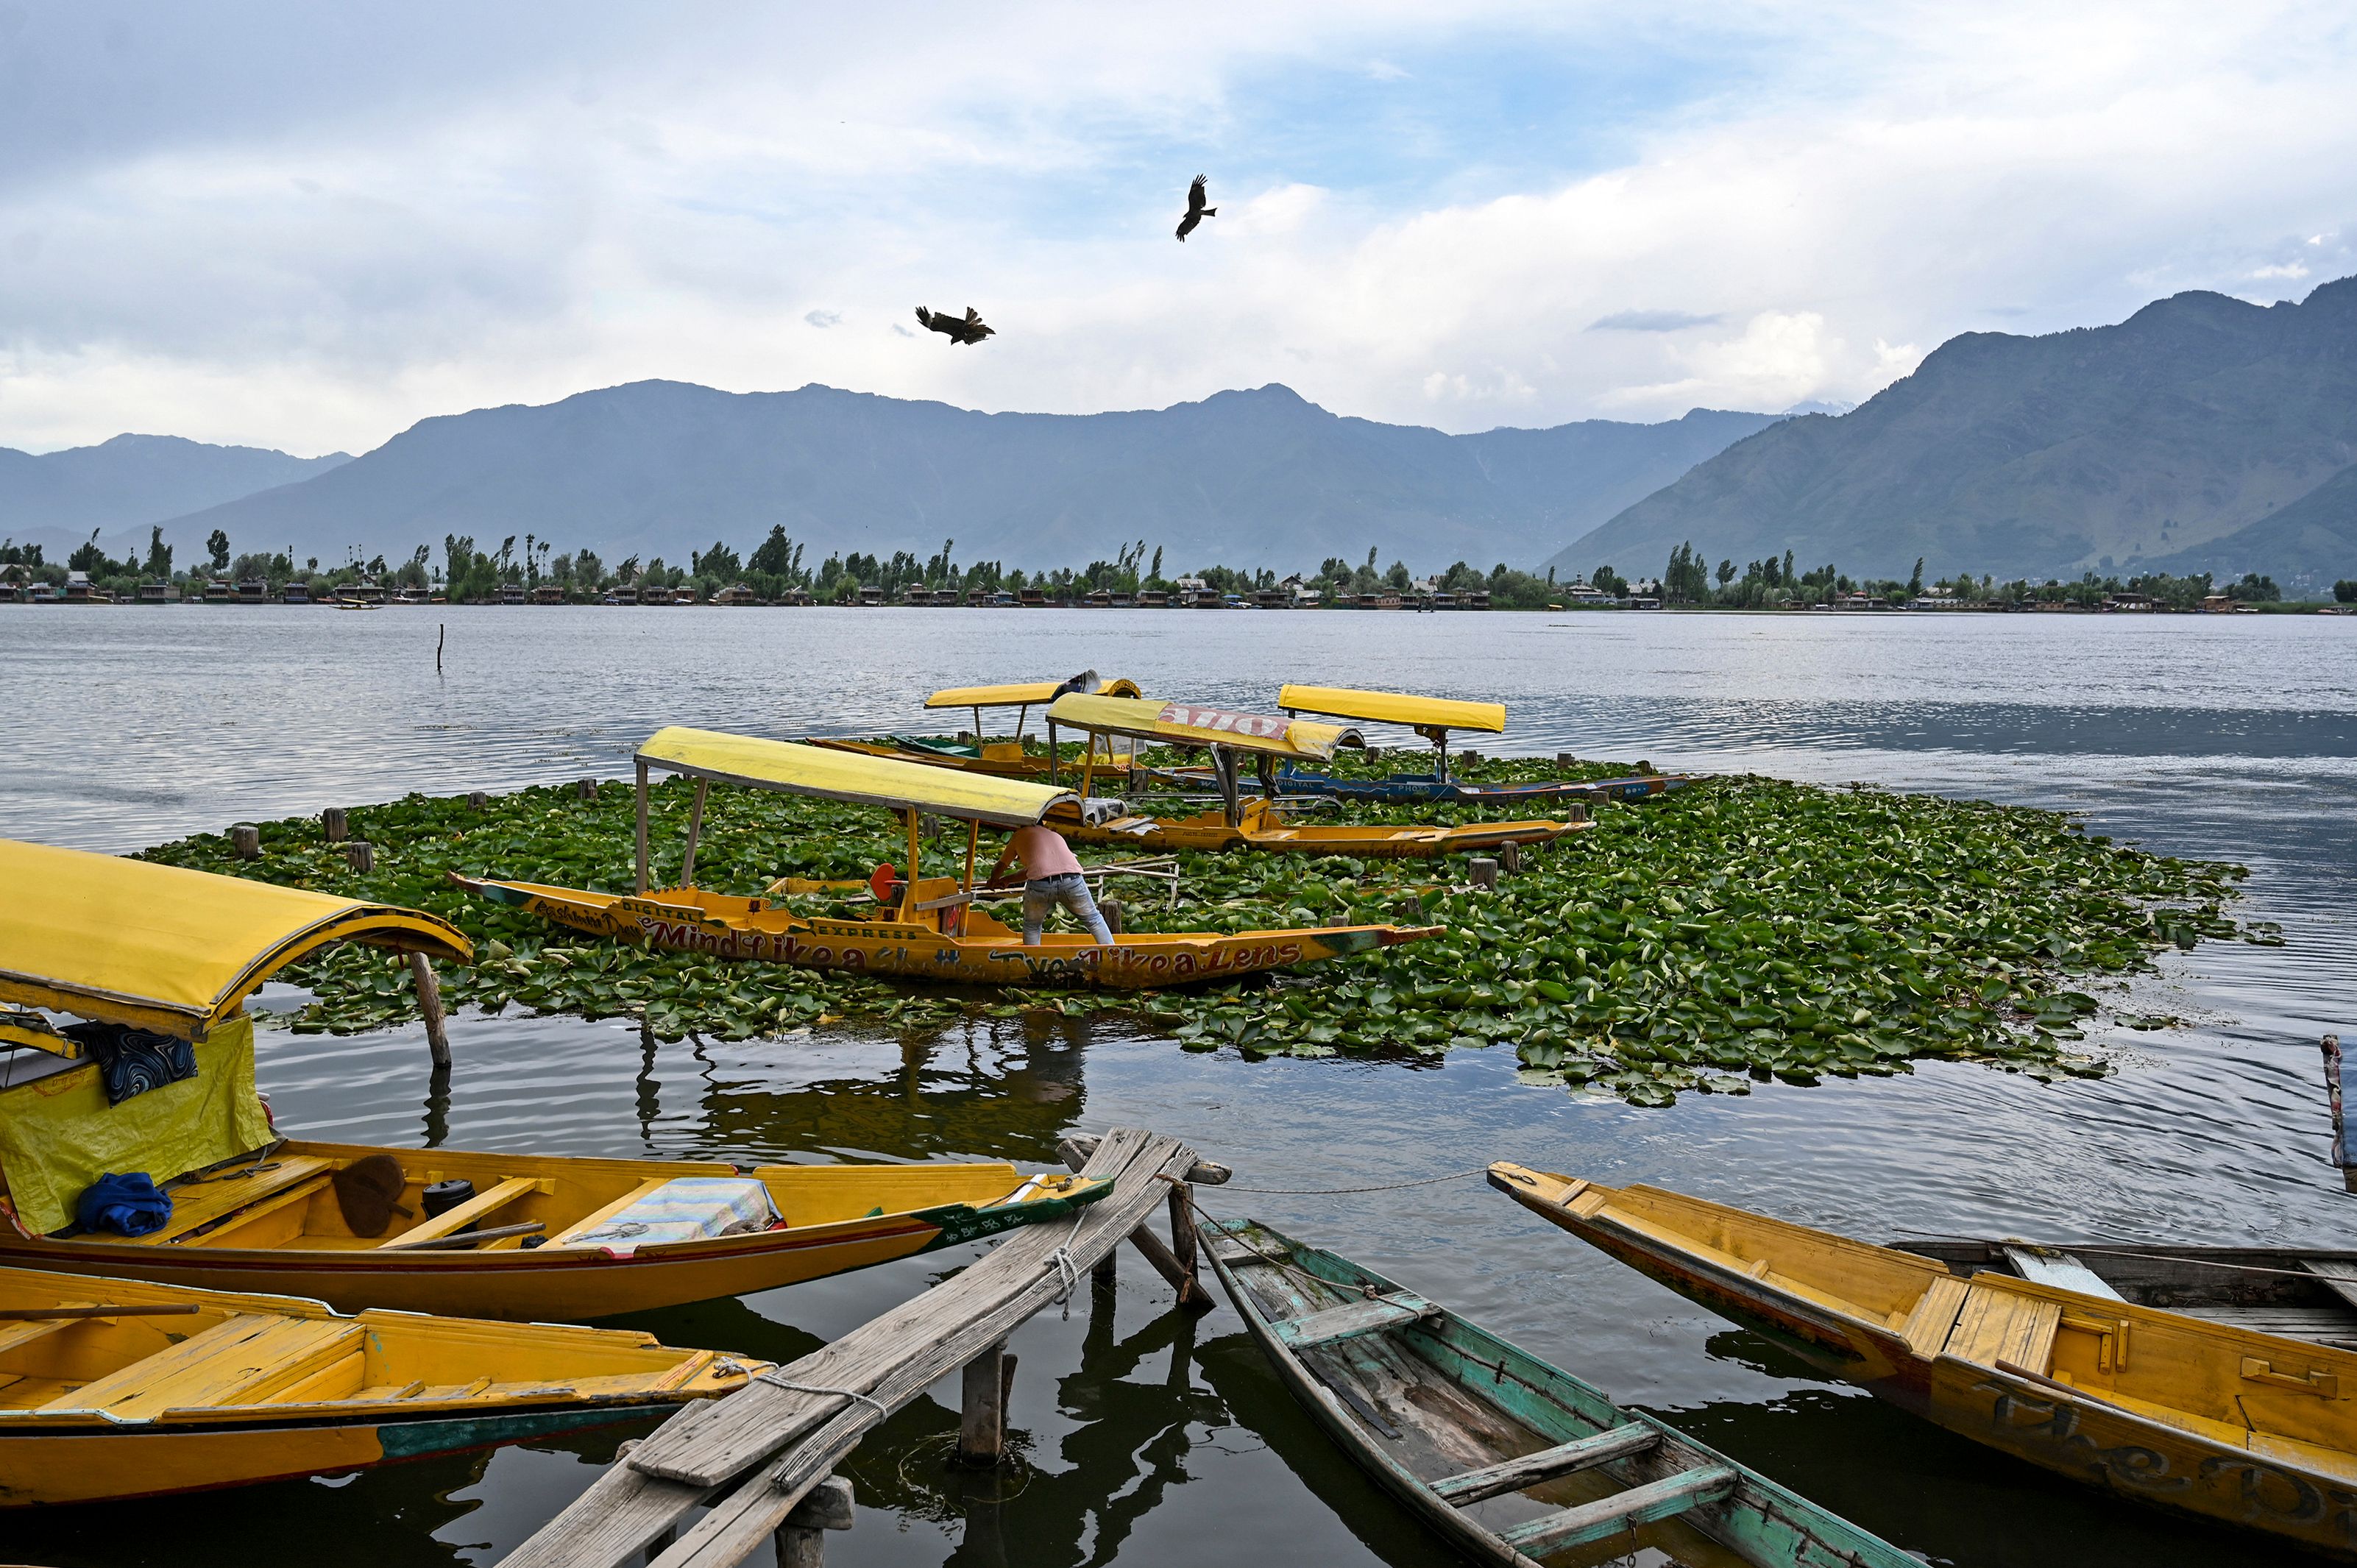 A Kashmiri boatman stands on his boat as he waits for customers in the Dal lake in Srinagar on June 26, 2019. (Tauseef MUSTAFA / AFP via Getty Images)